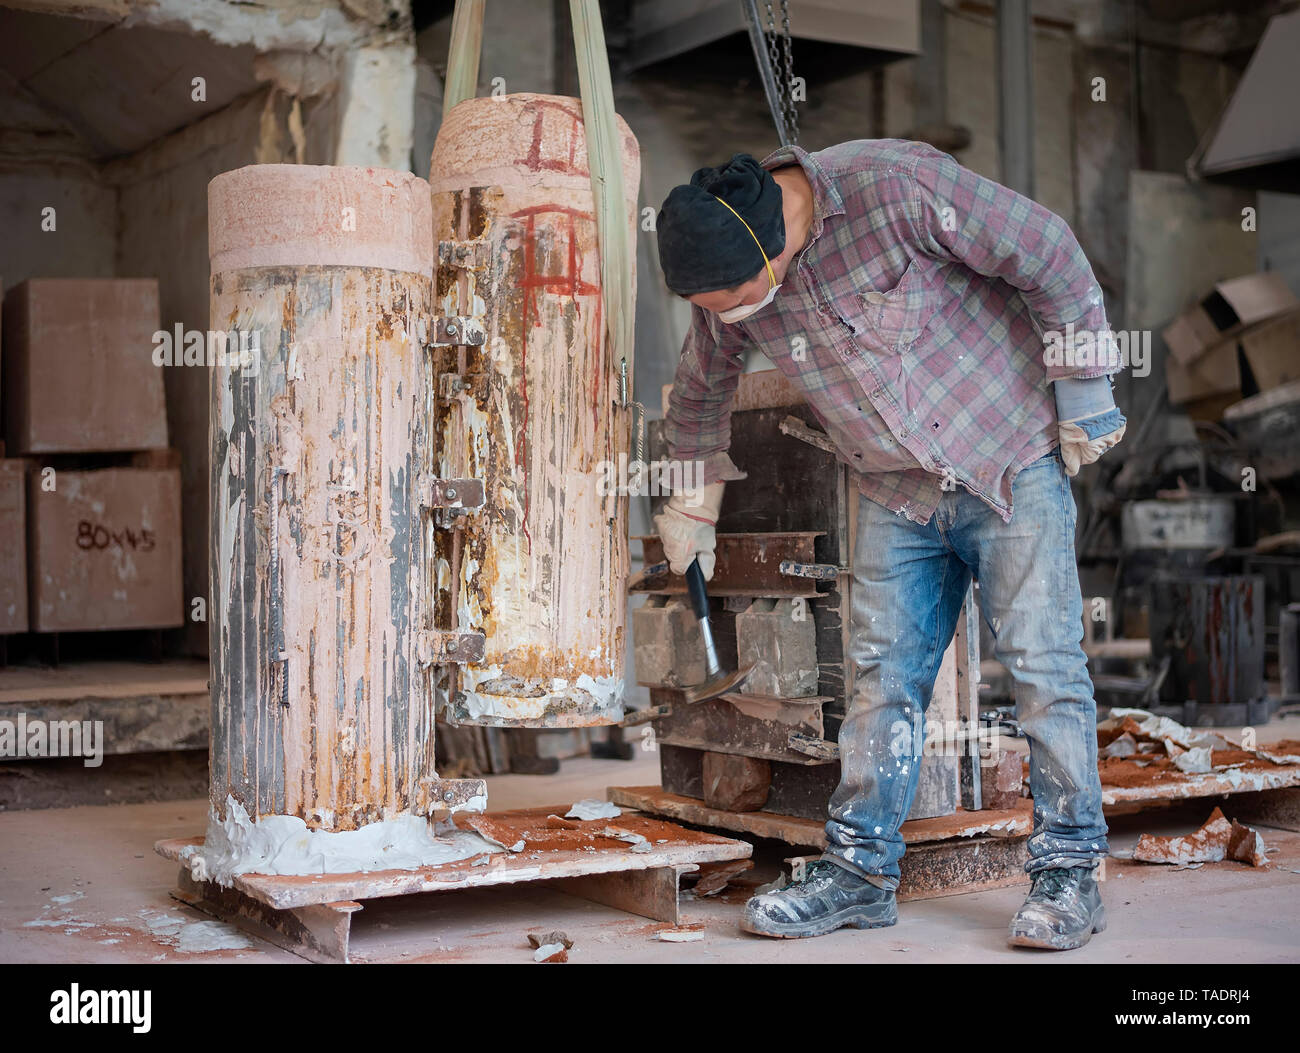 Art foundry, Foundry worker hammering on casting mould Stock Photo